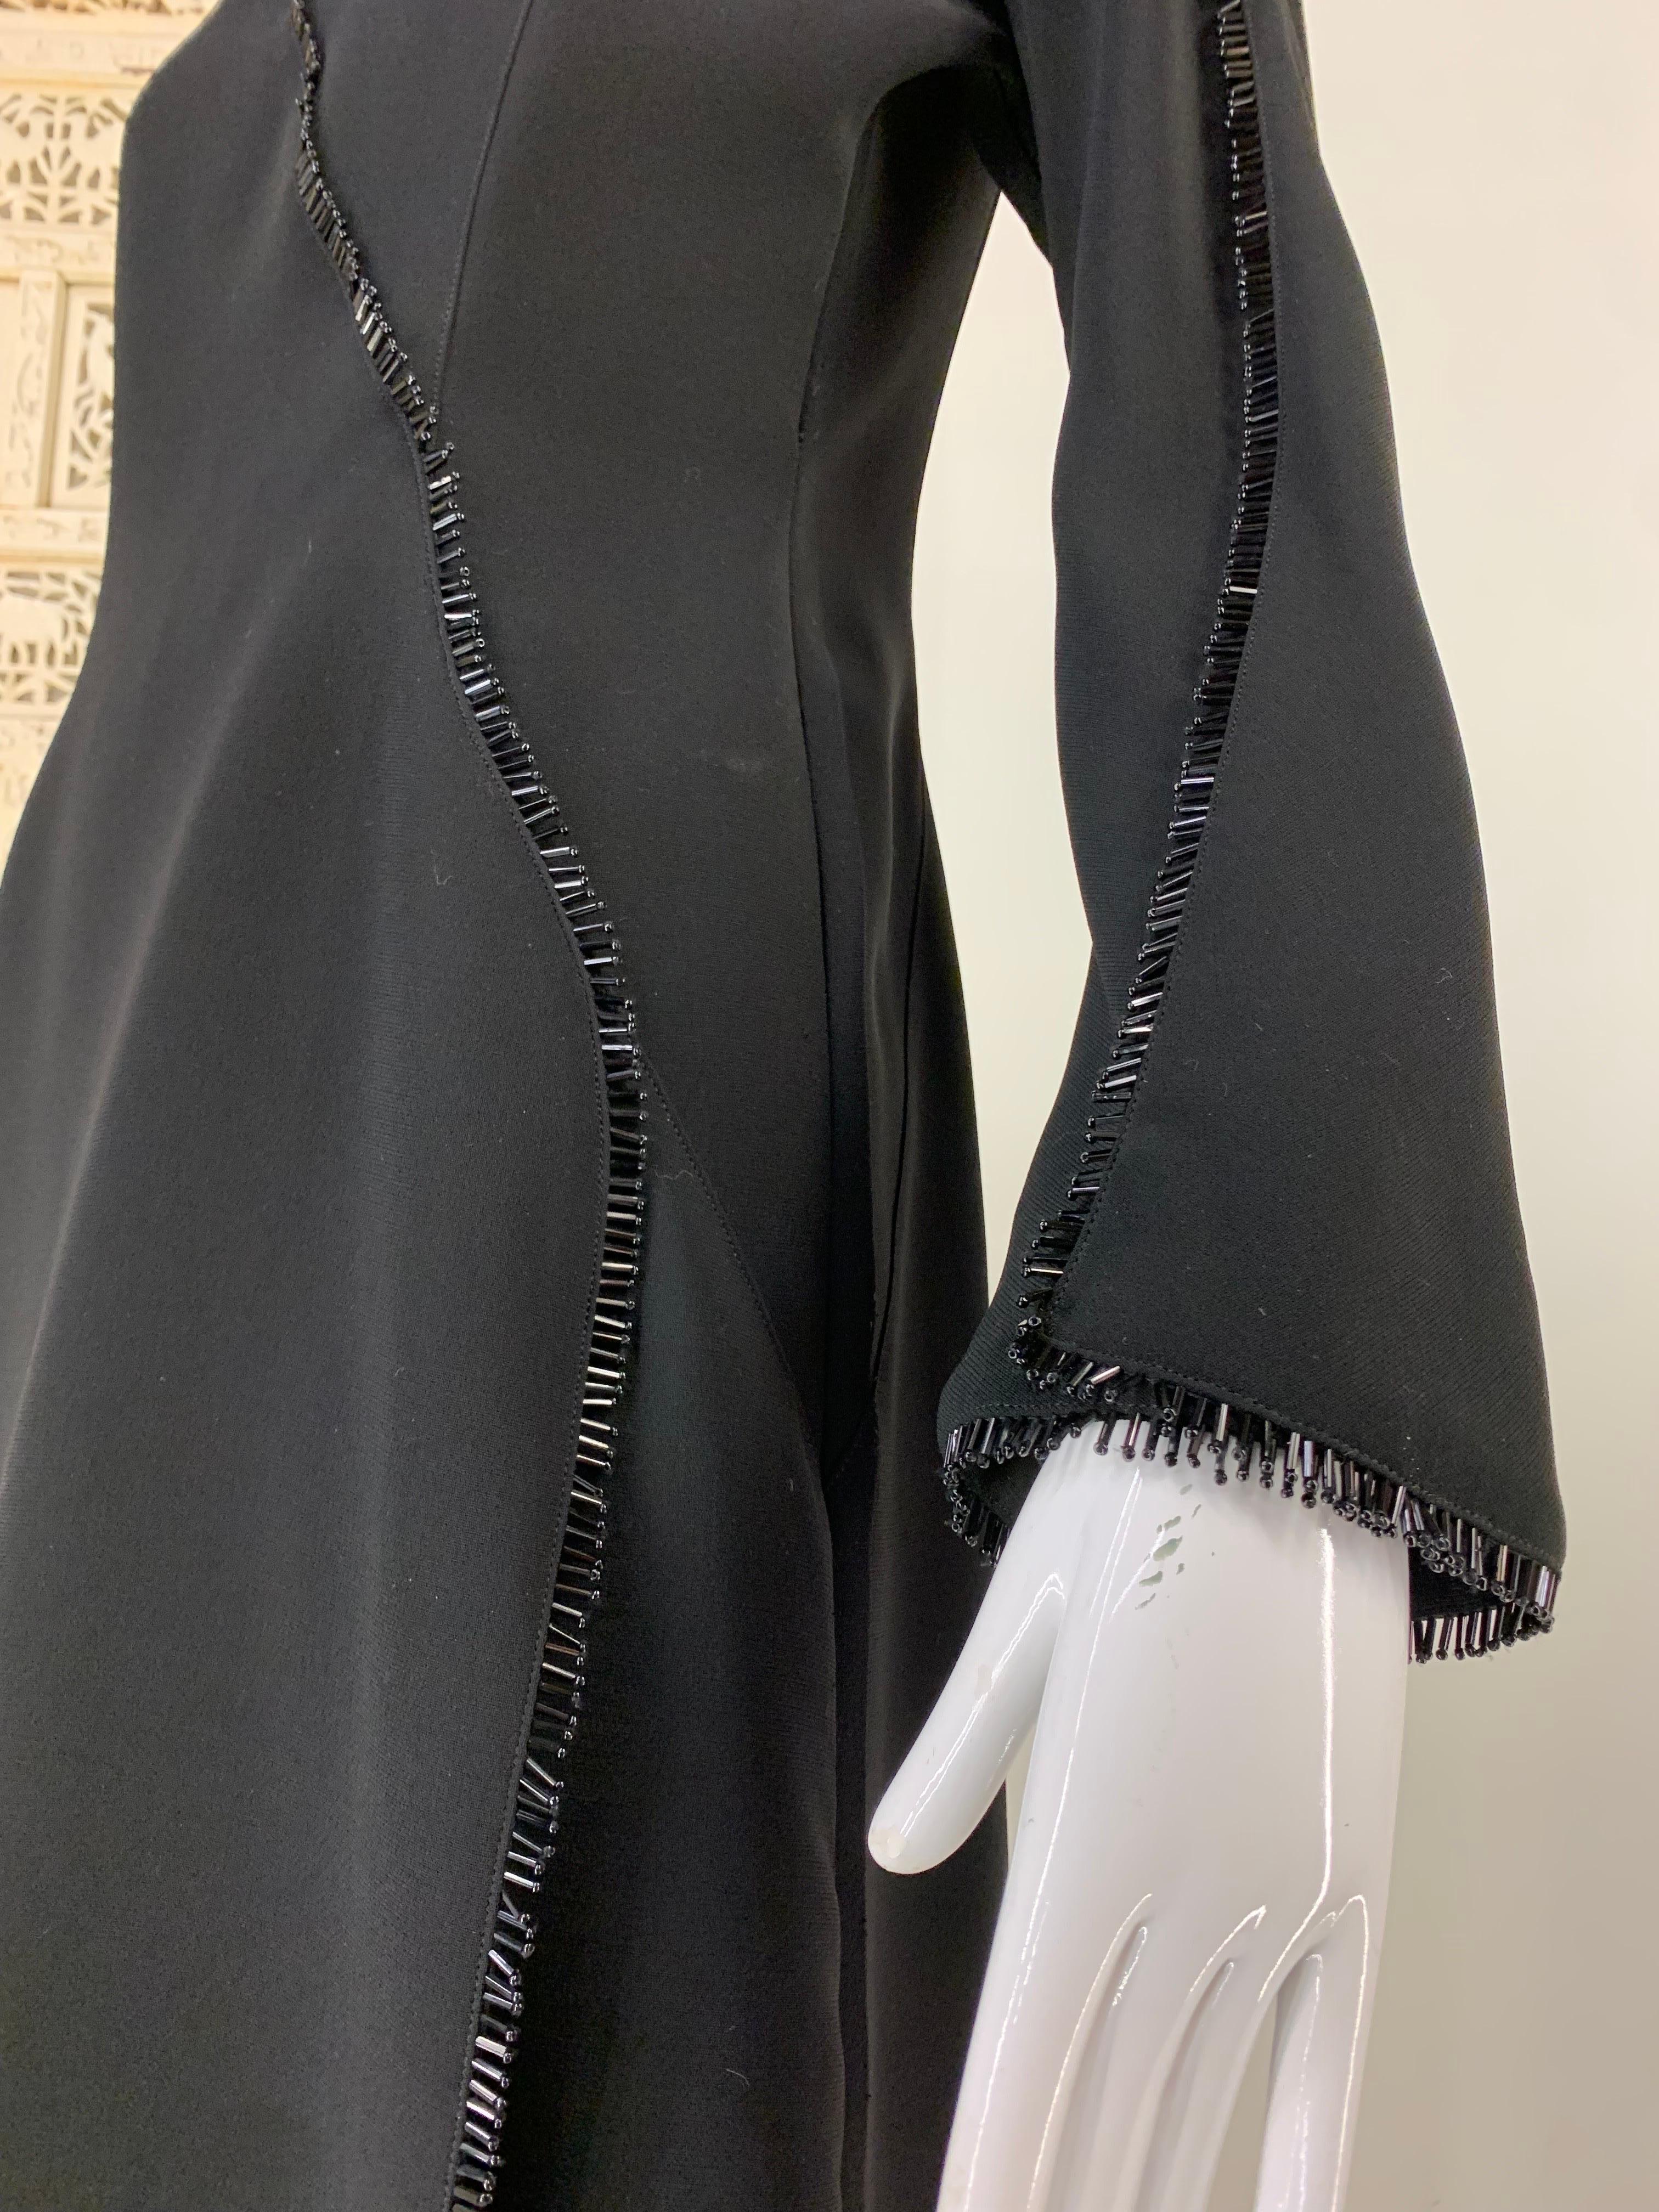 1990s Thierry Mugler Fit & Flare Wrap Style Black Cocktail Dress w Bead Fringe  In Excellent Condition For Sale In Gresham, OR